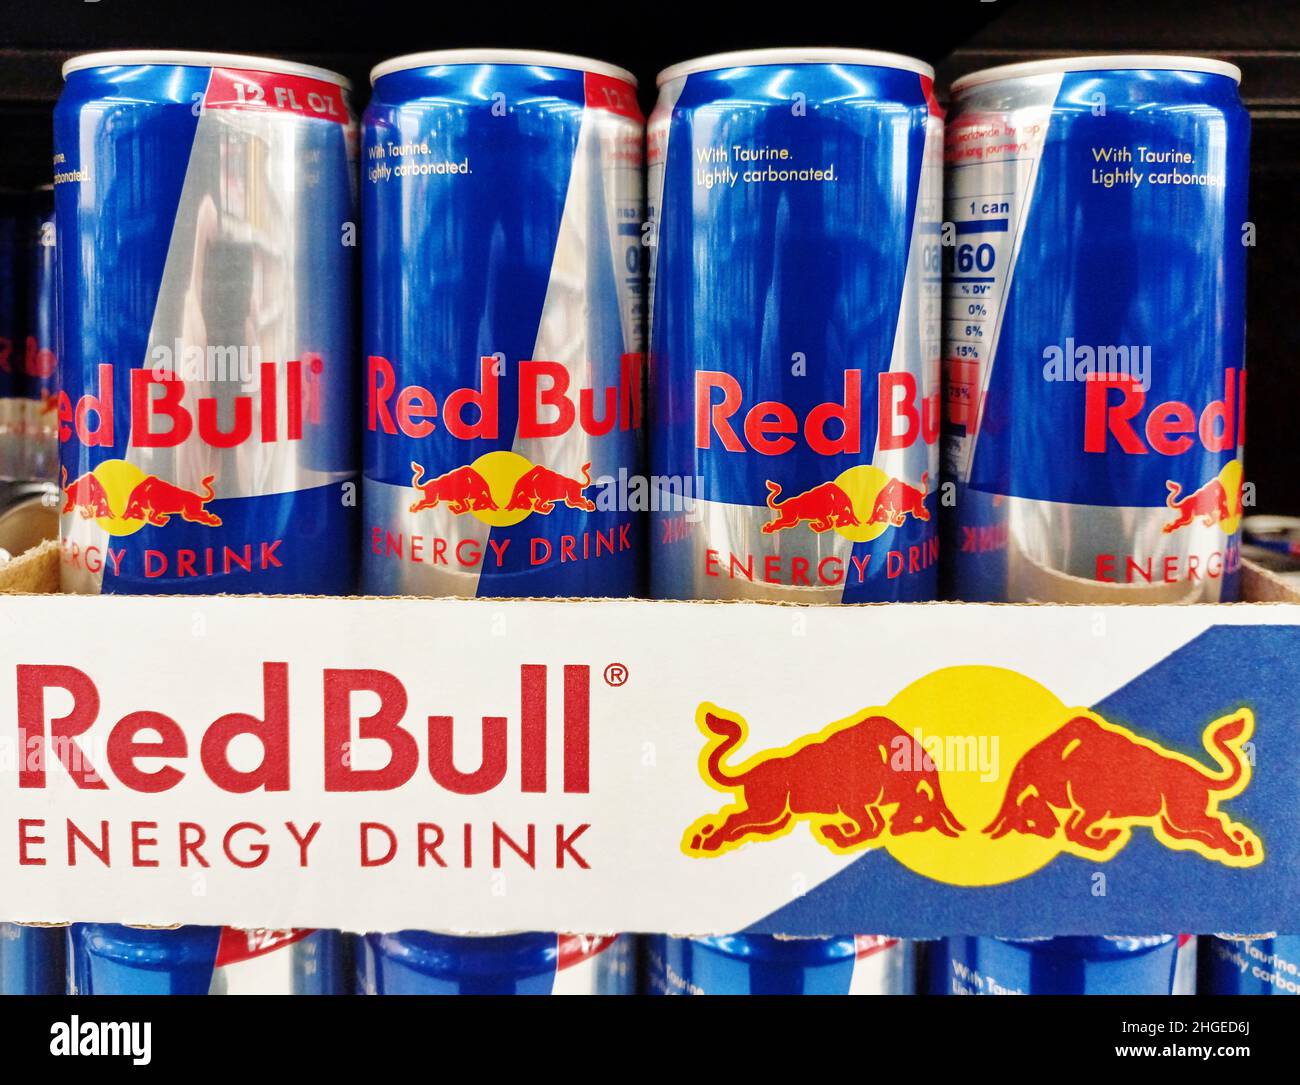 Red Bull Energy Drink High Resolution Stock Photography and Images - Alamy